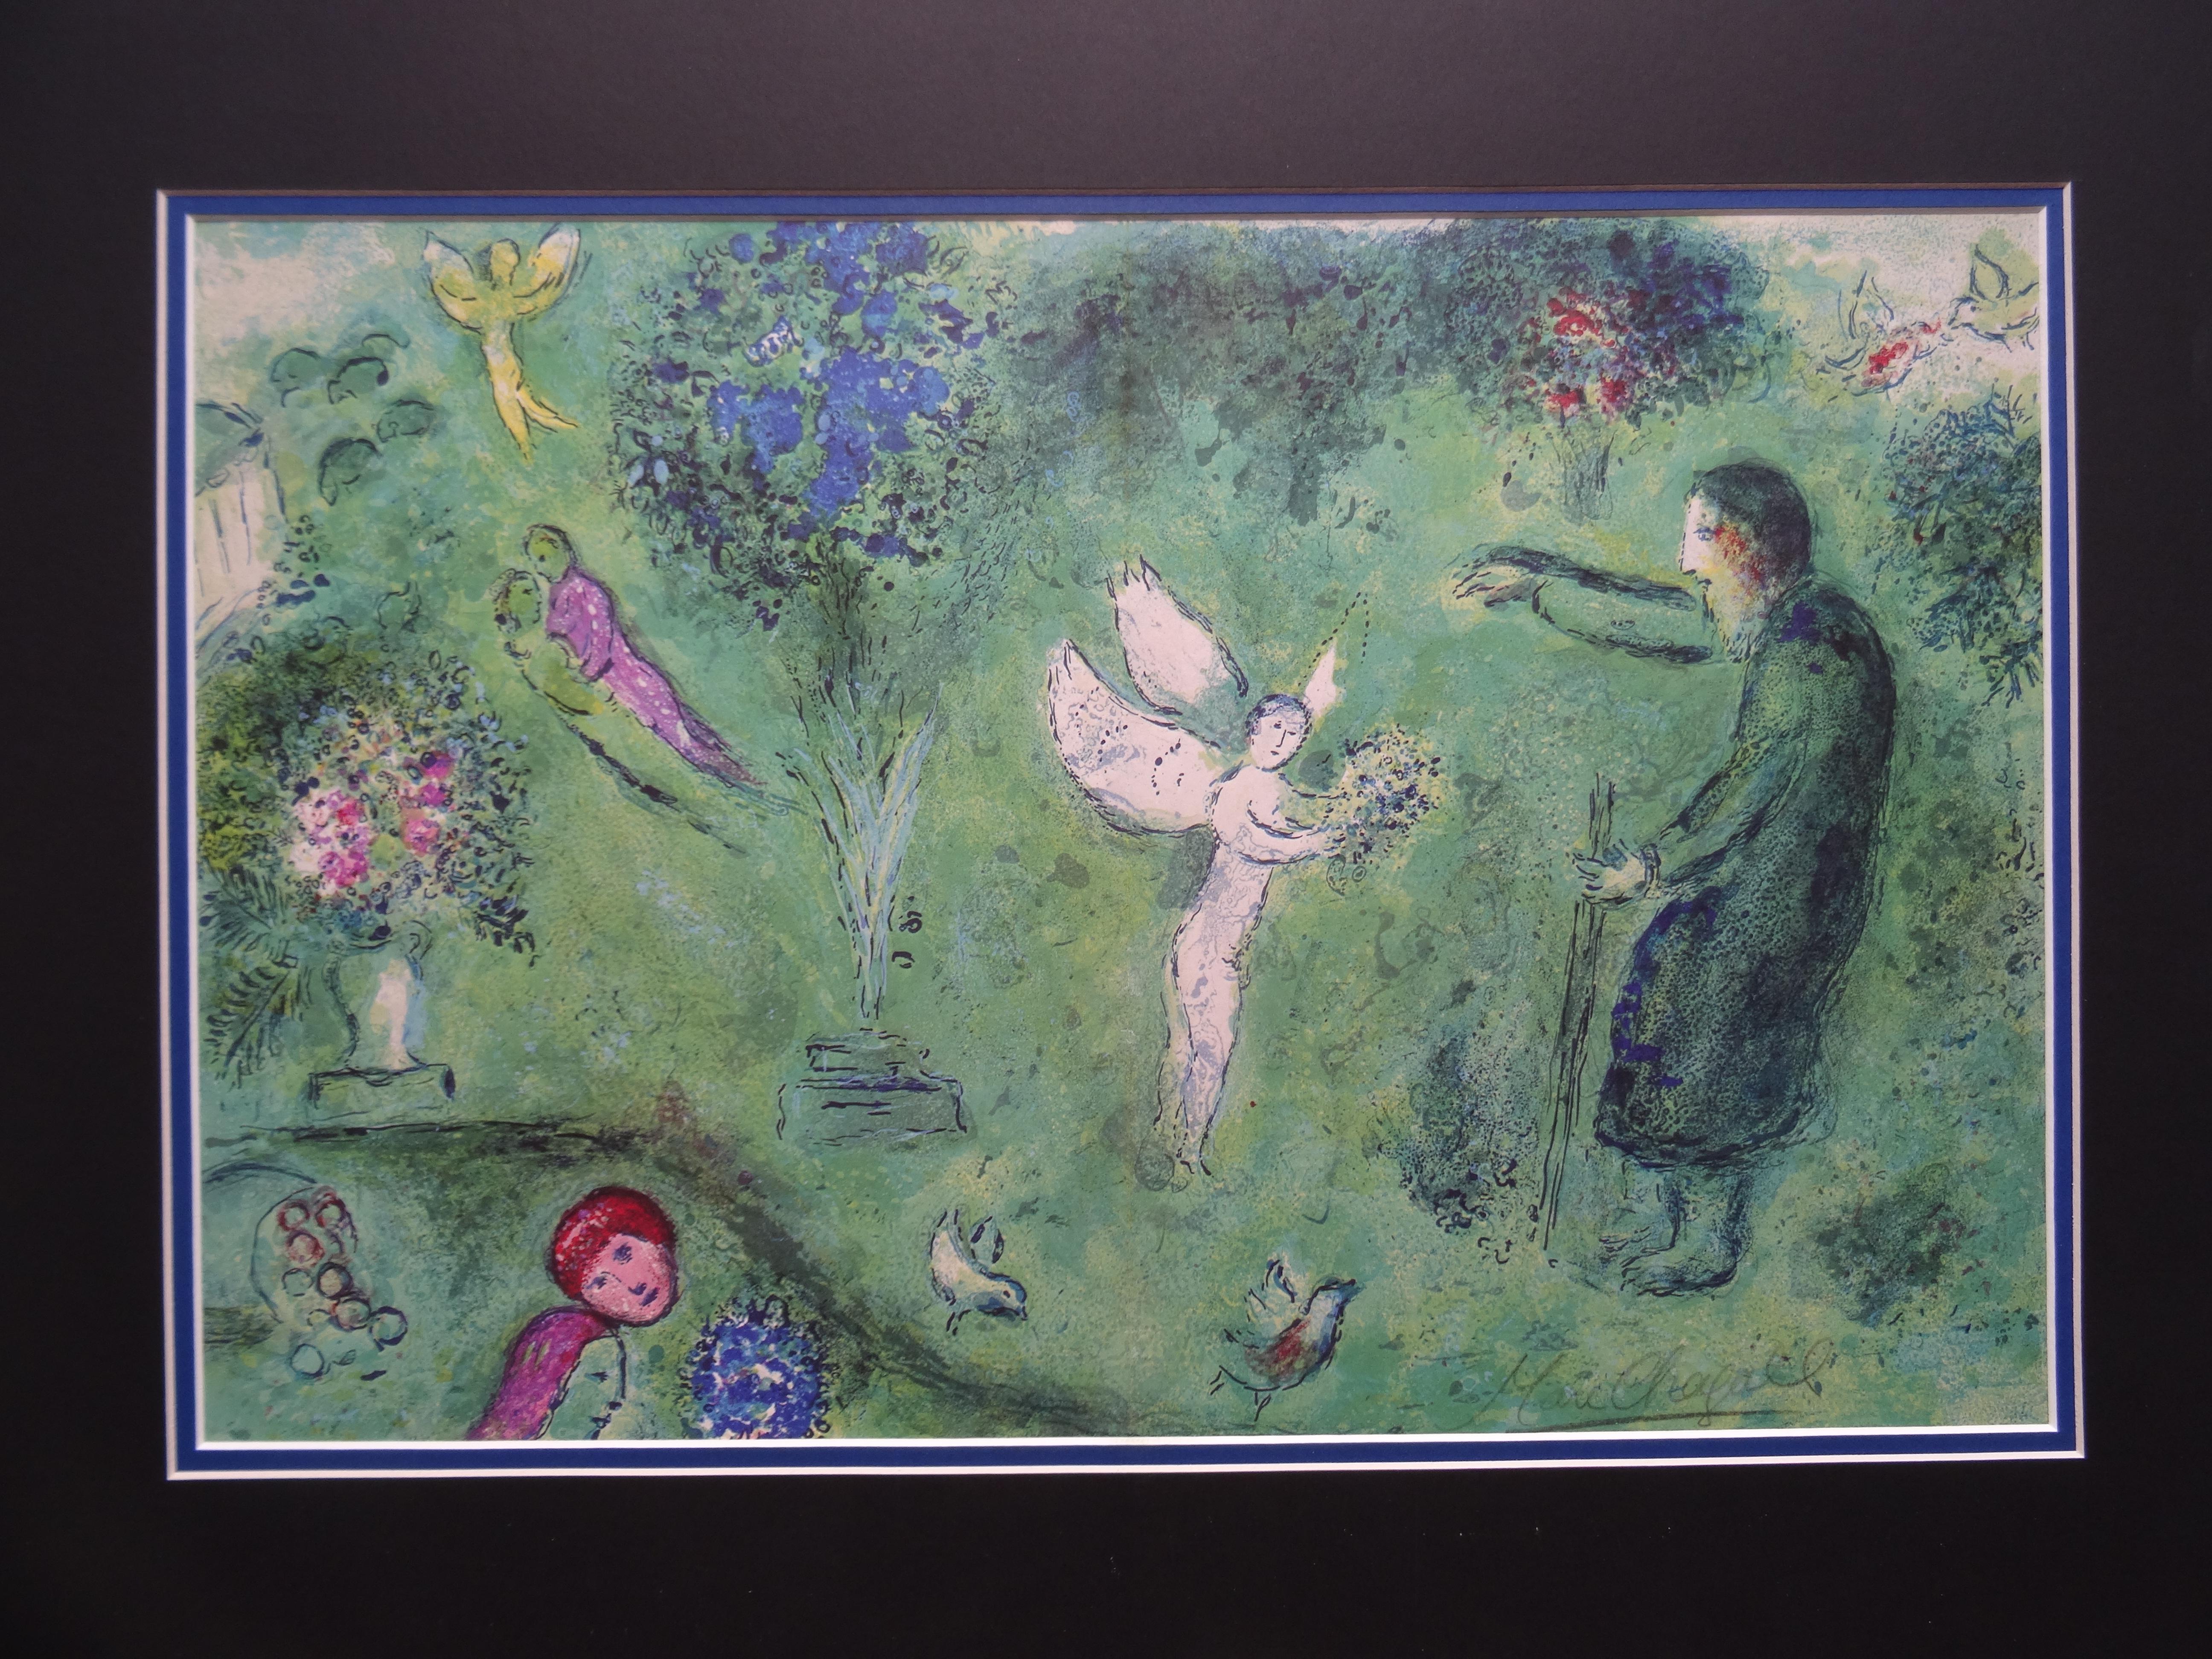 Daphnis and Chloe Suite. Paper, lithography, 31x47 cm - Print by Marc Chagall